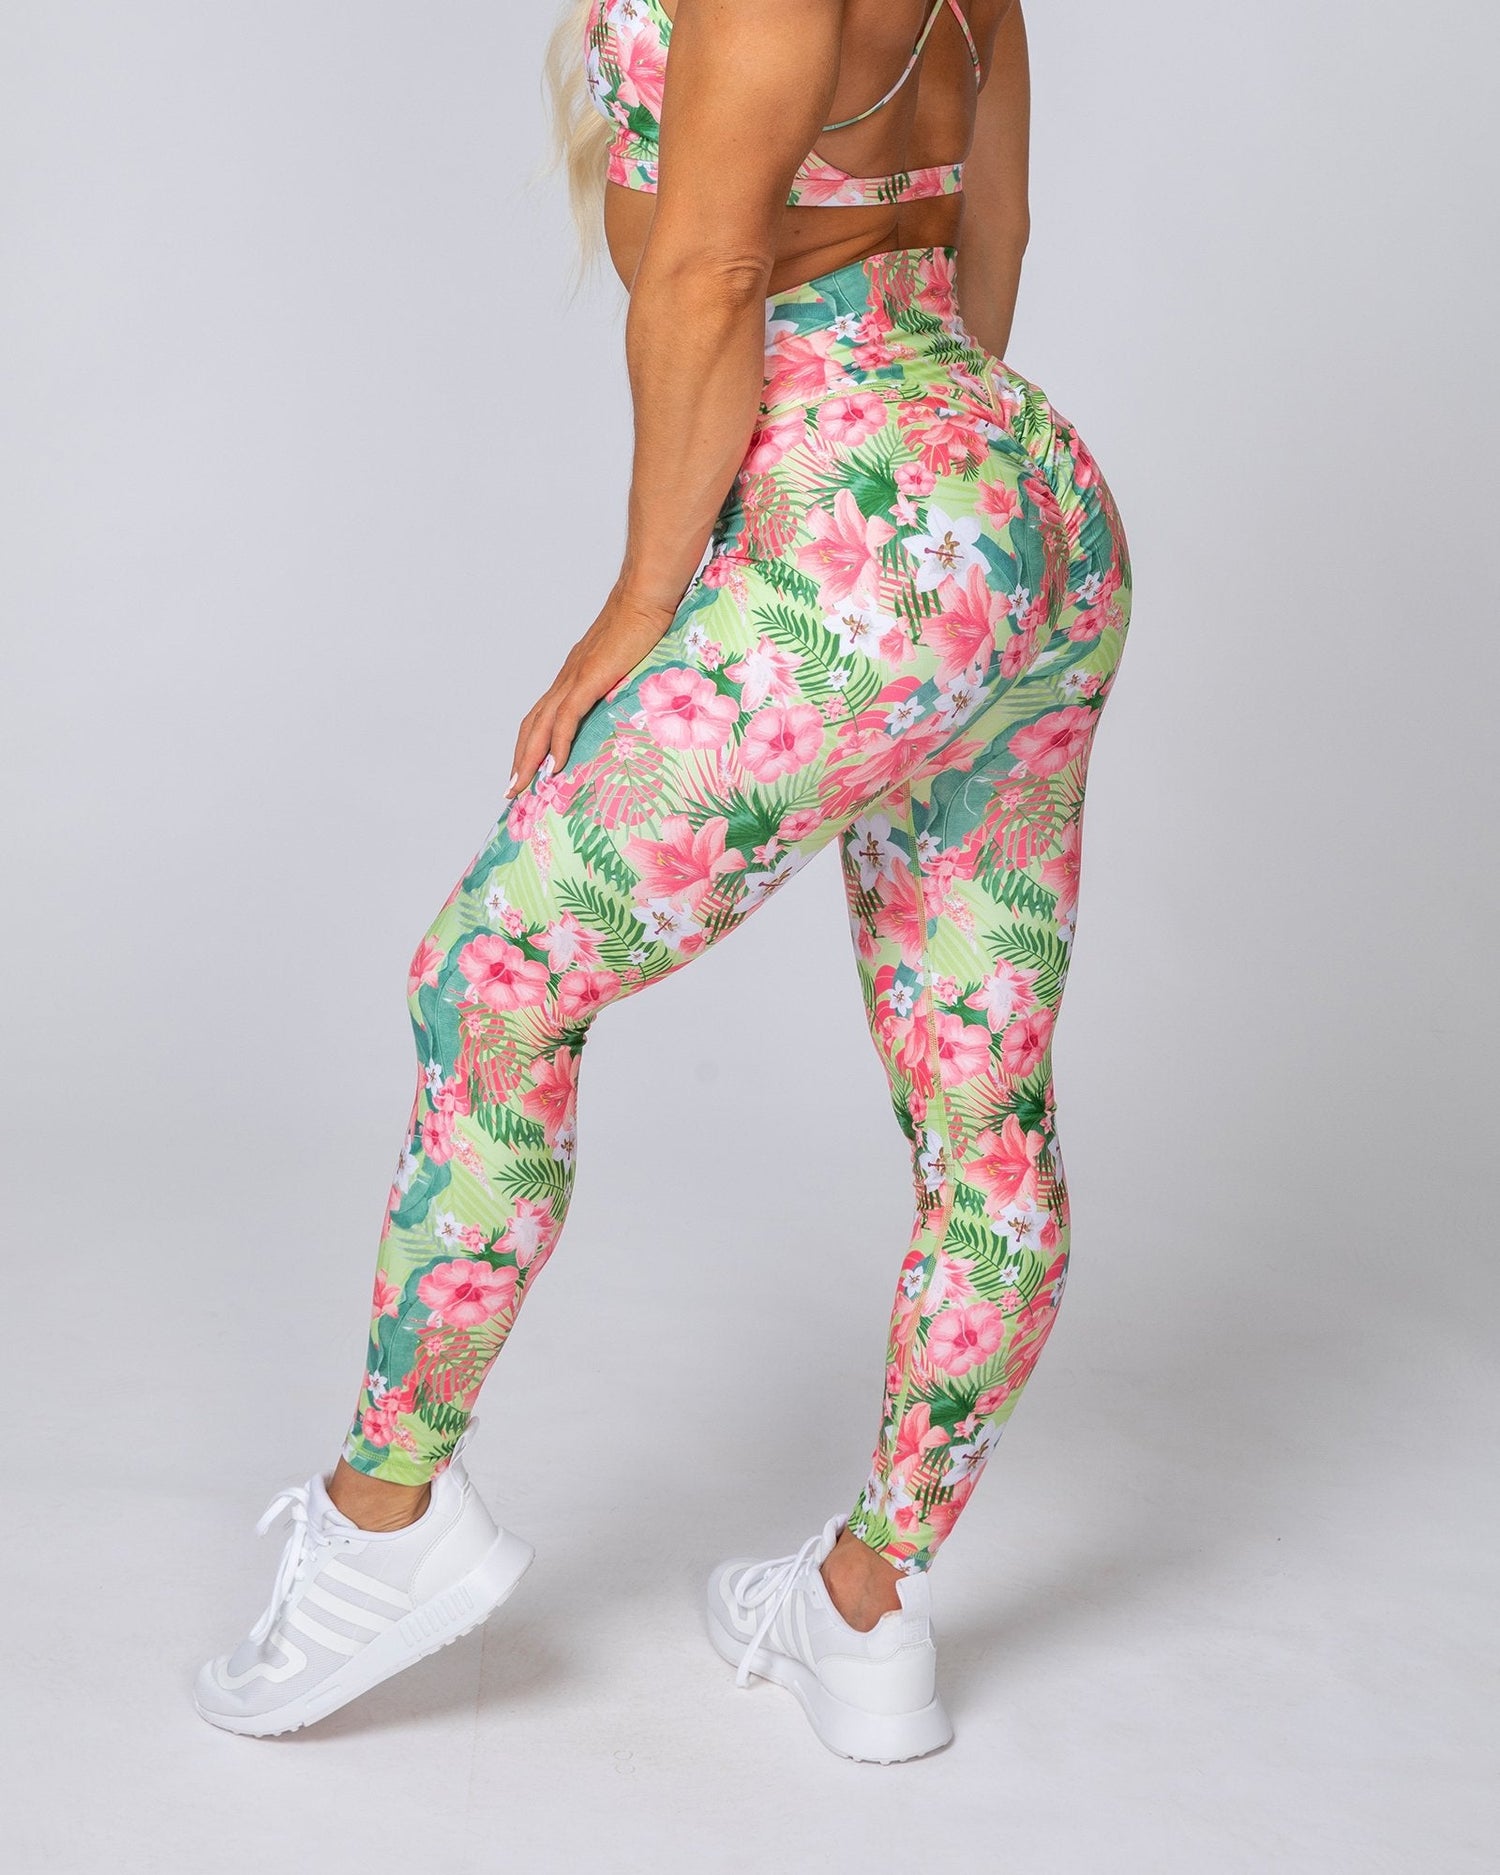 Wholesale Stylish Patterned Comfy Activewear Seamless Scrunch